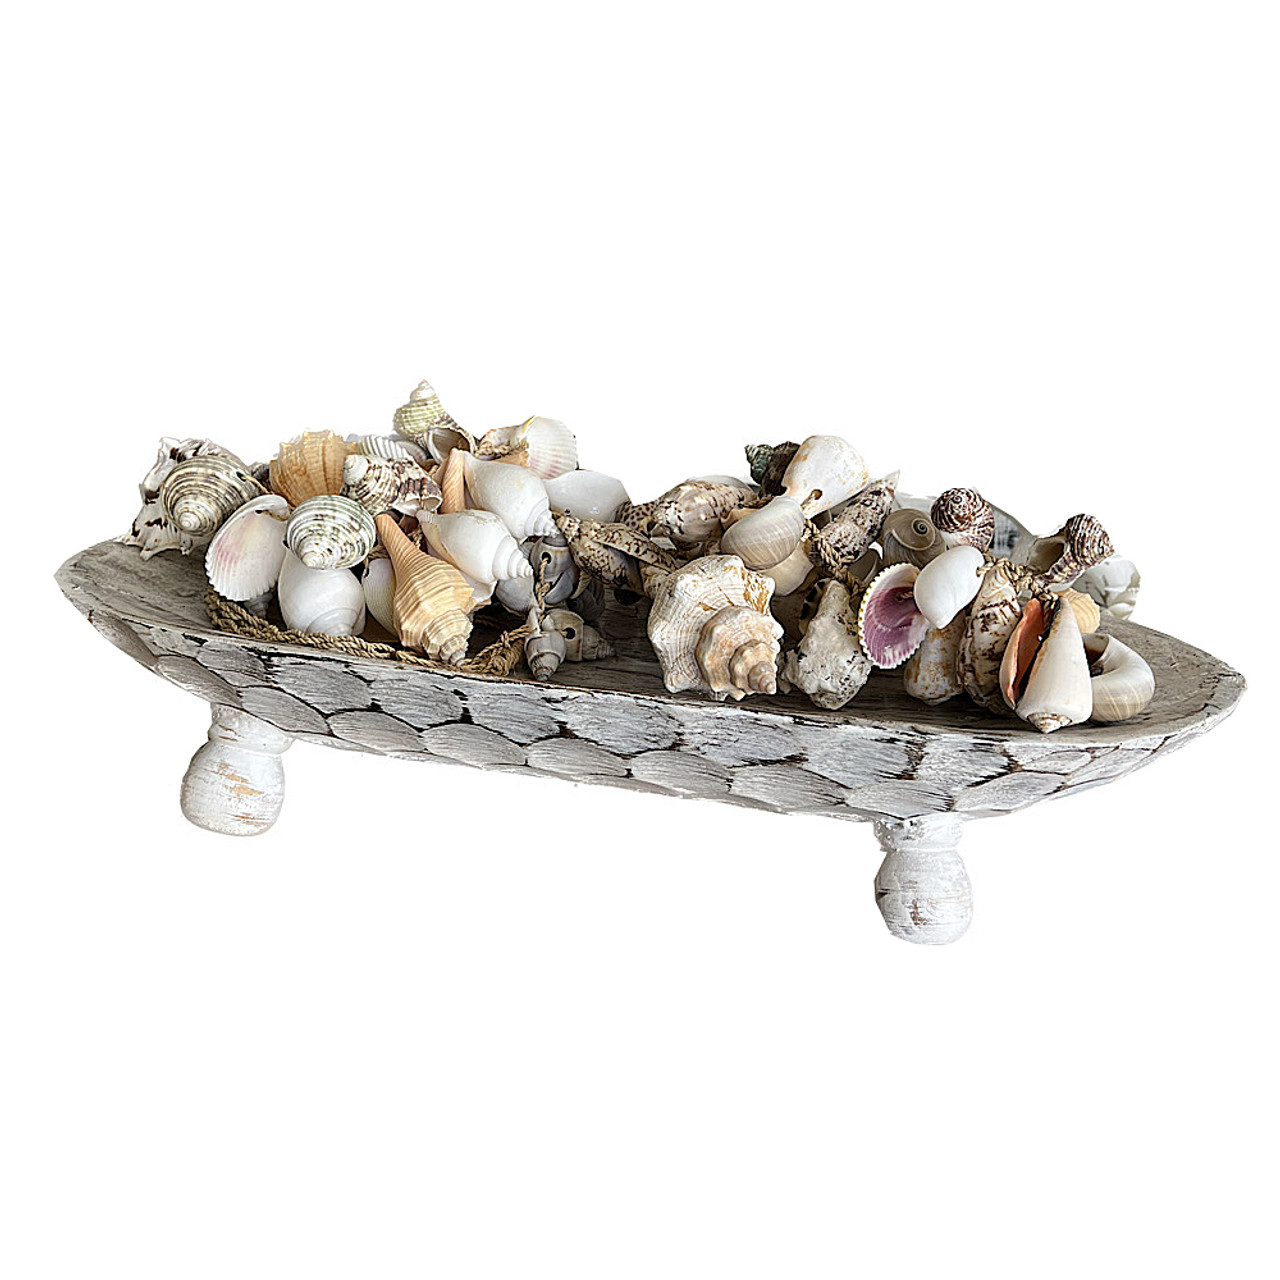 Hamptons wooden carved bowl on feet 
50cm. white wash display with our mixed shell garland (sold seperately )